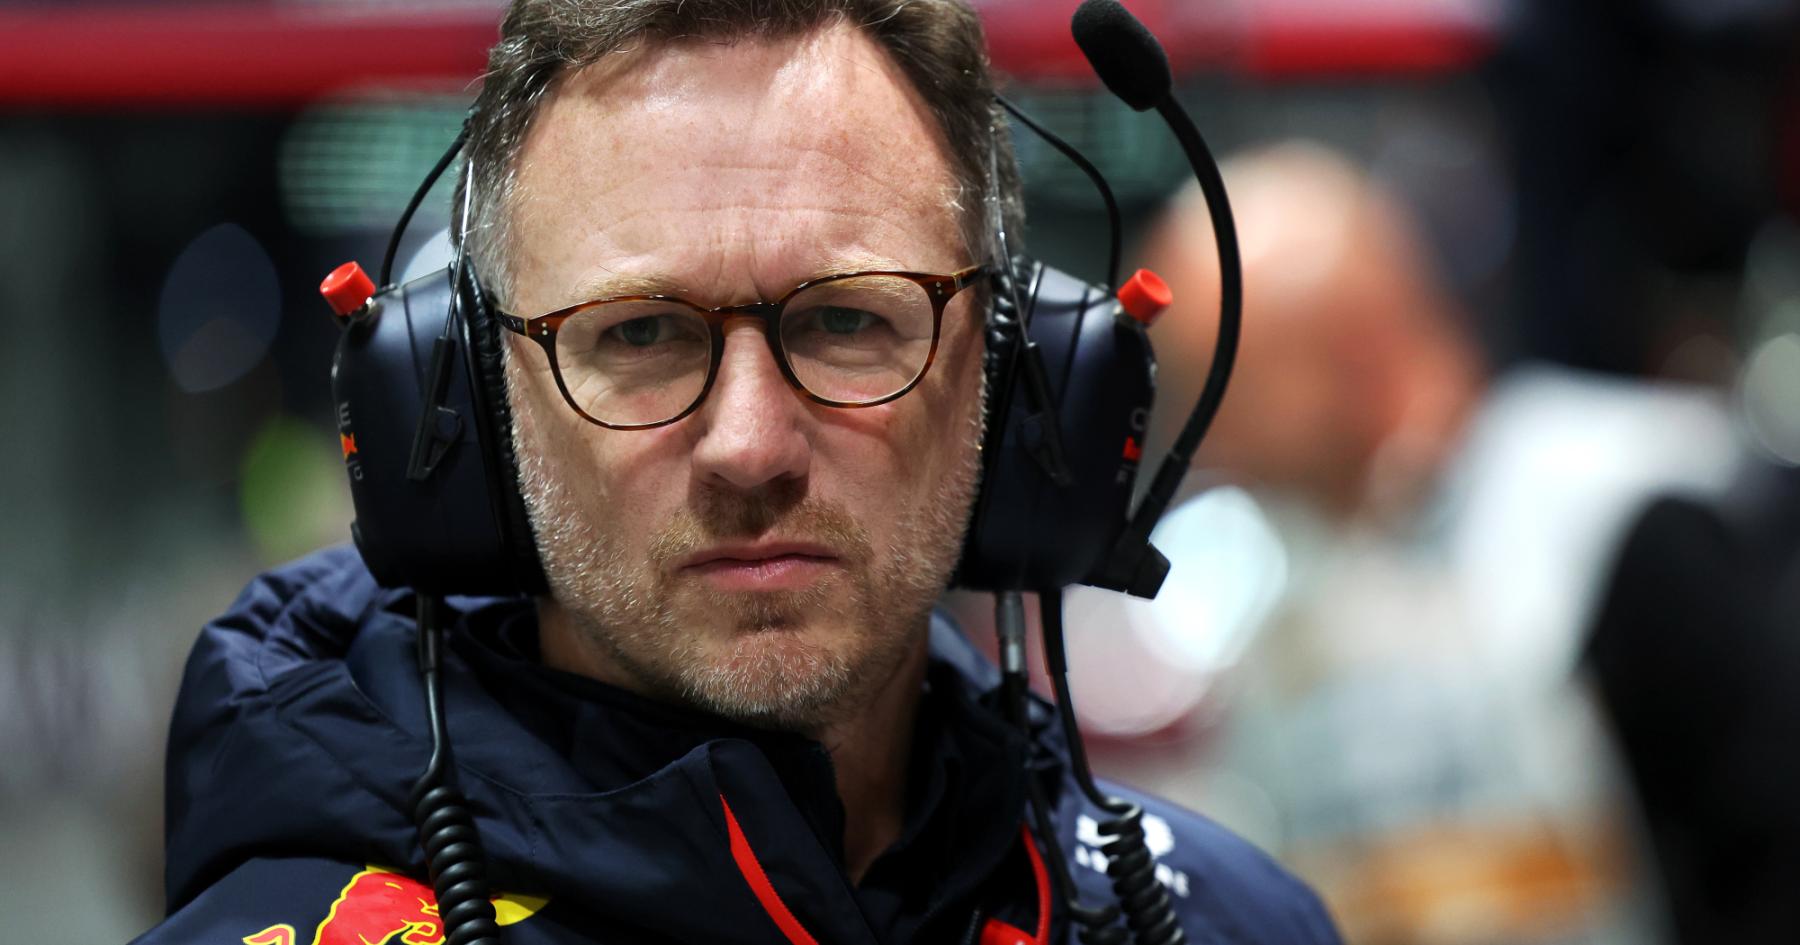 Exciting uncertainty: Red Bull&#8217;s hesitation on Horner&#8217;s F1 future keeps fans on the edge